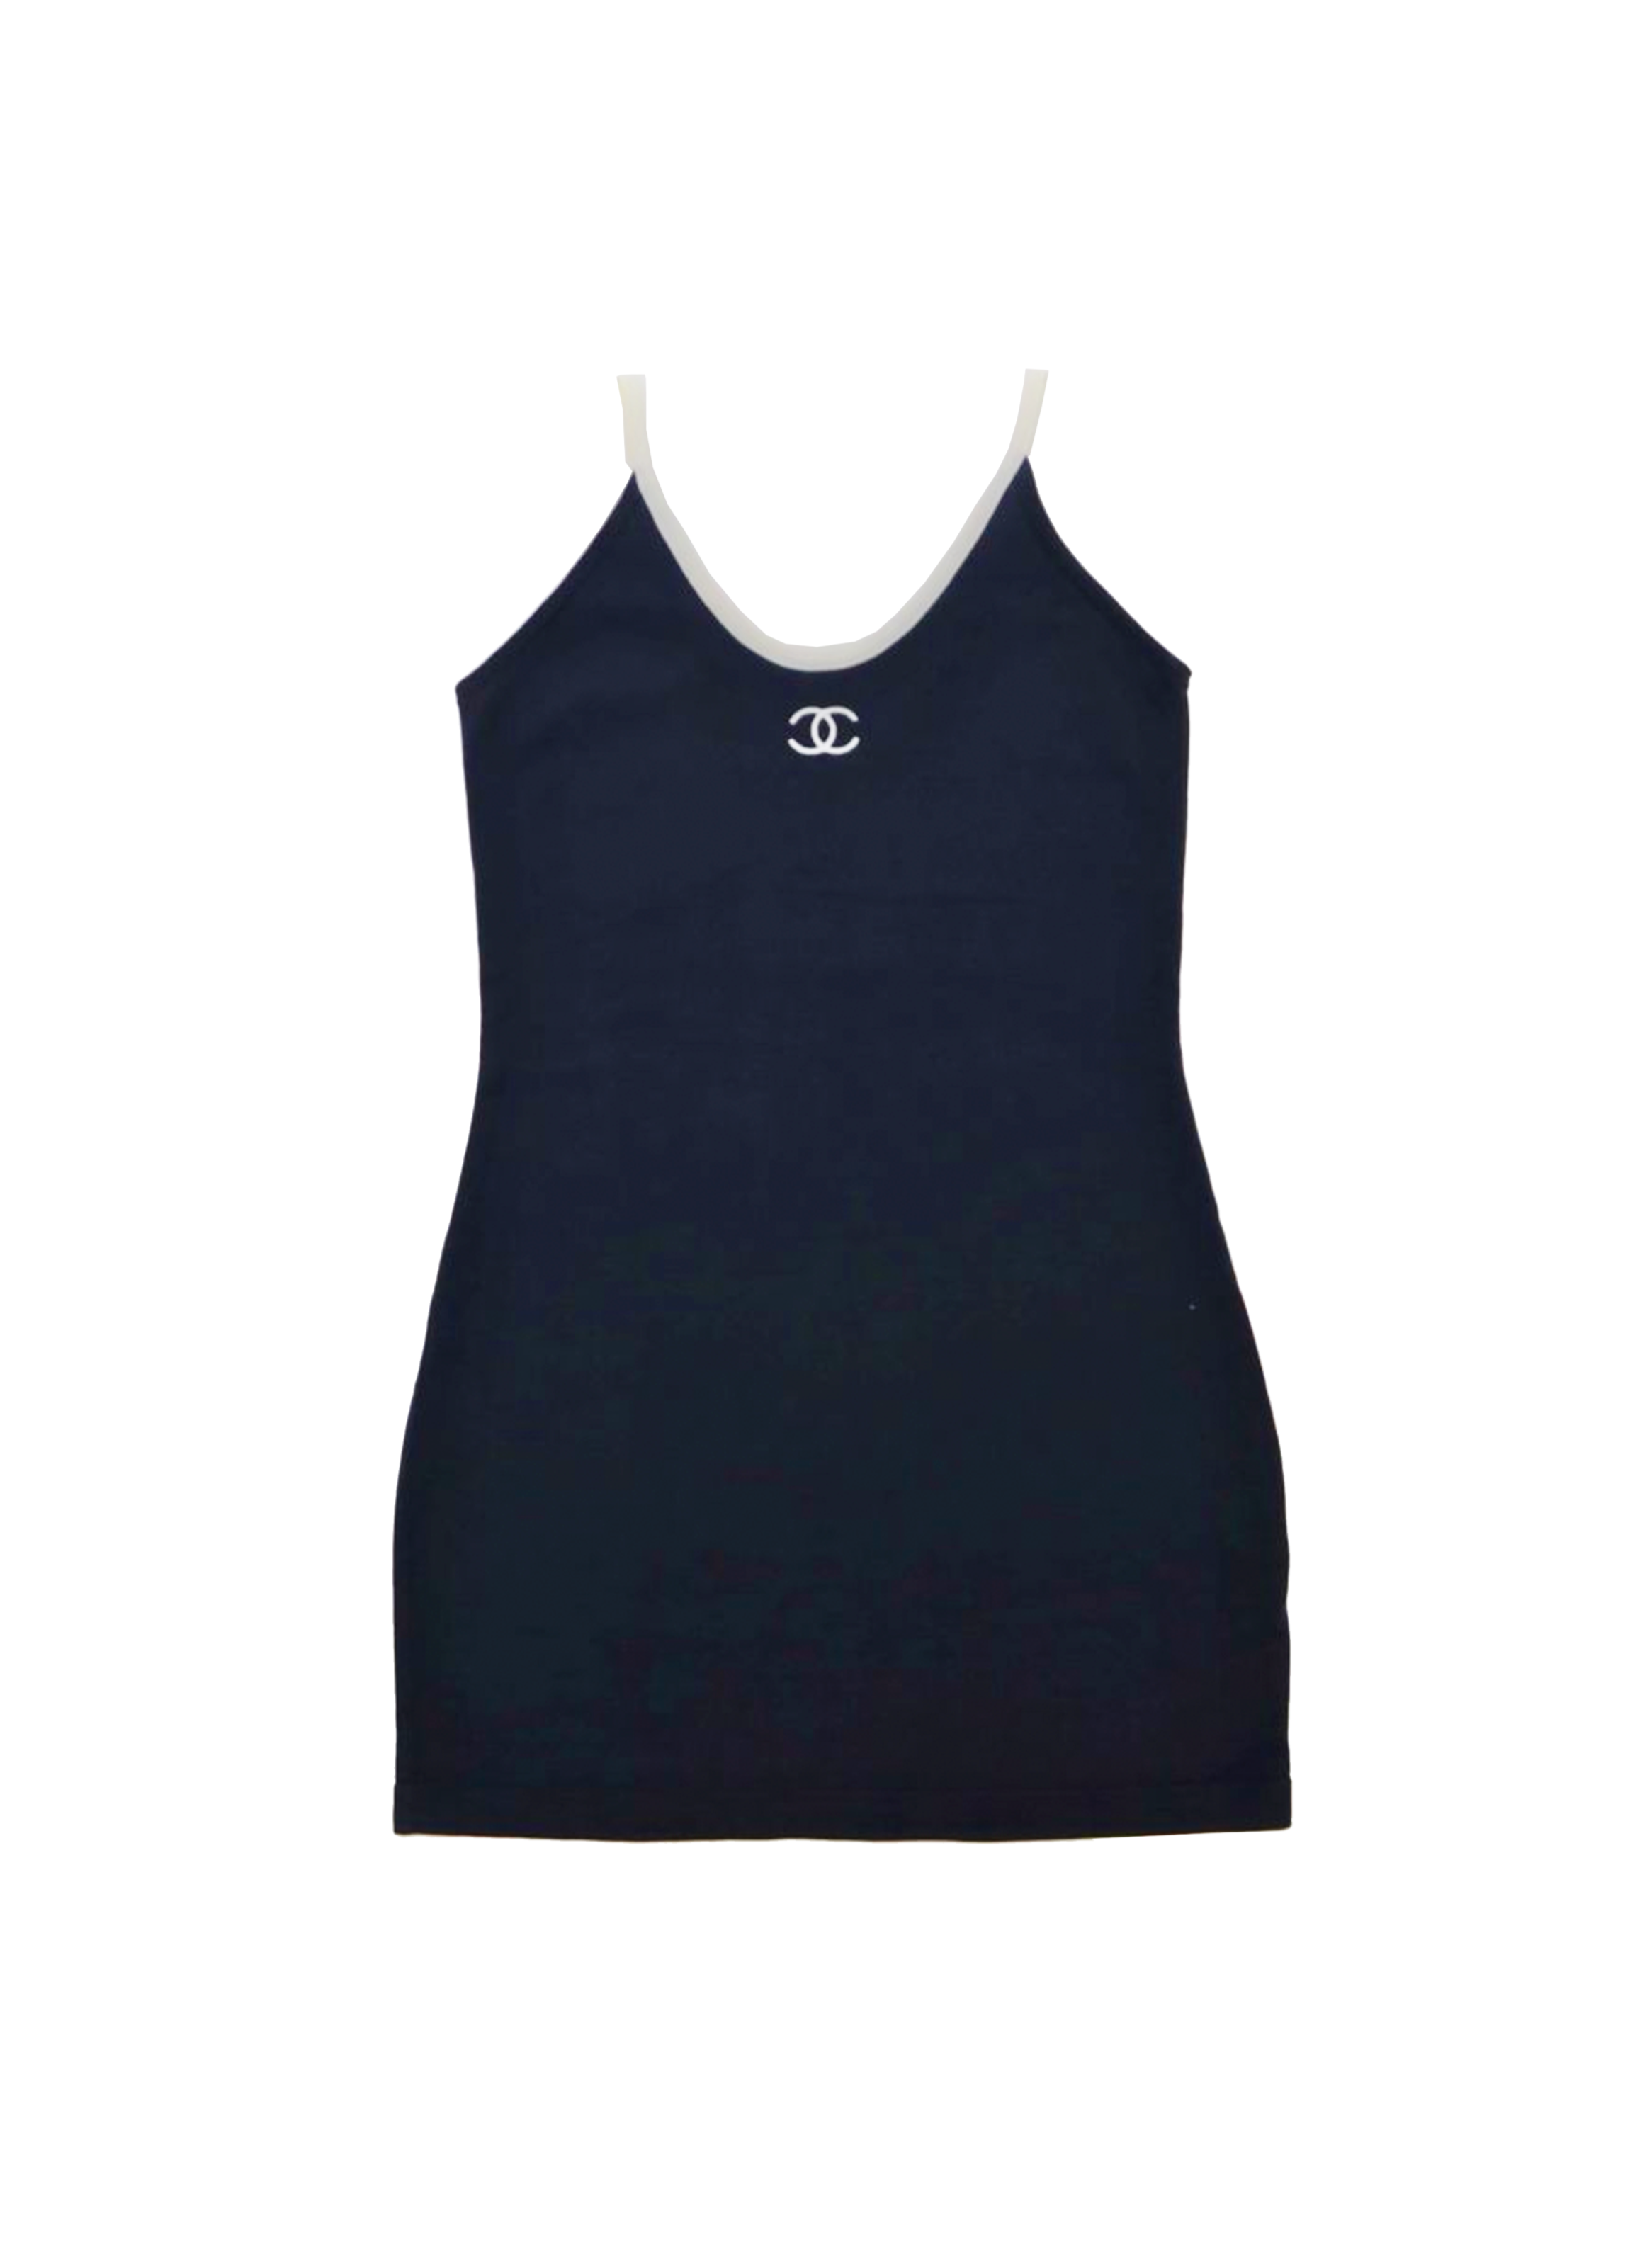 Chanel Ultra Rare Navy Knit Dress/Camisole